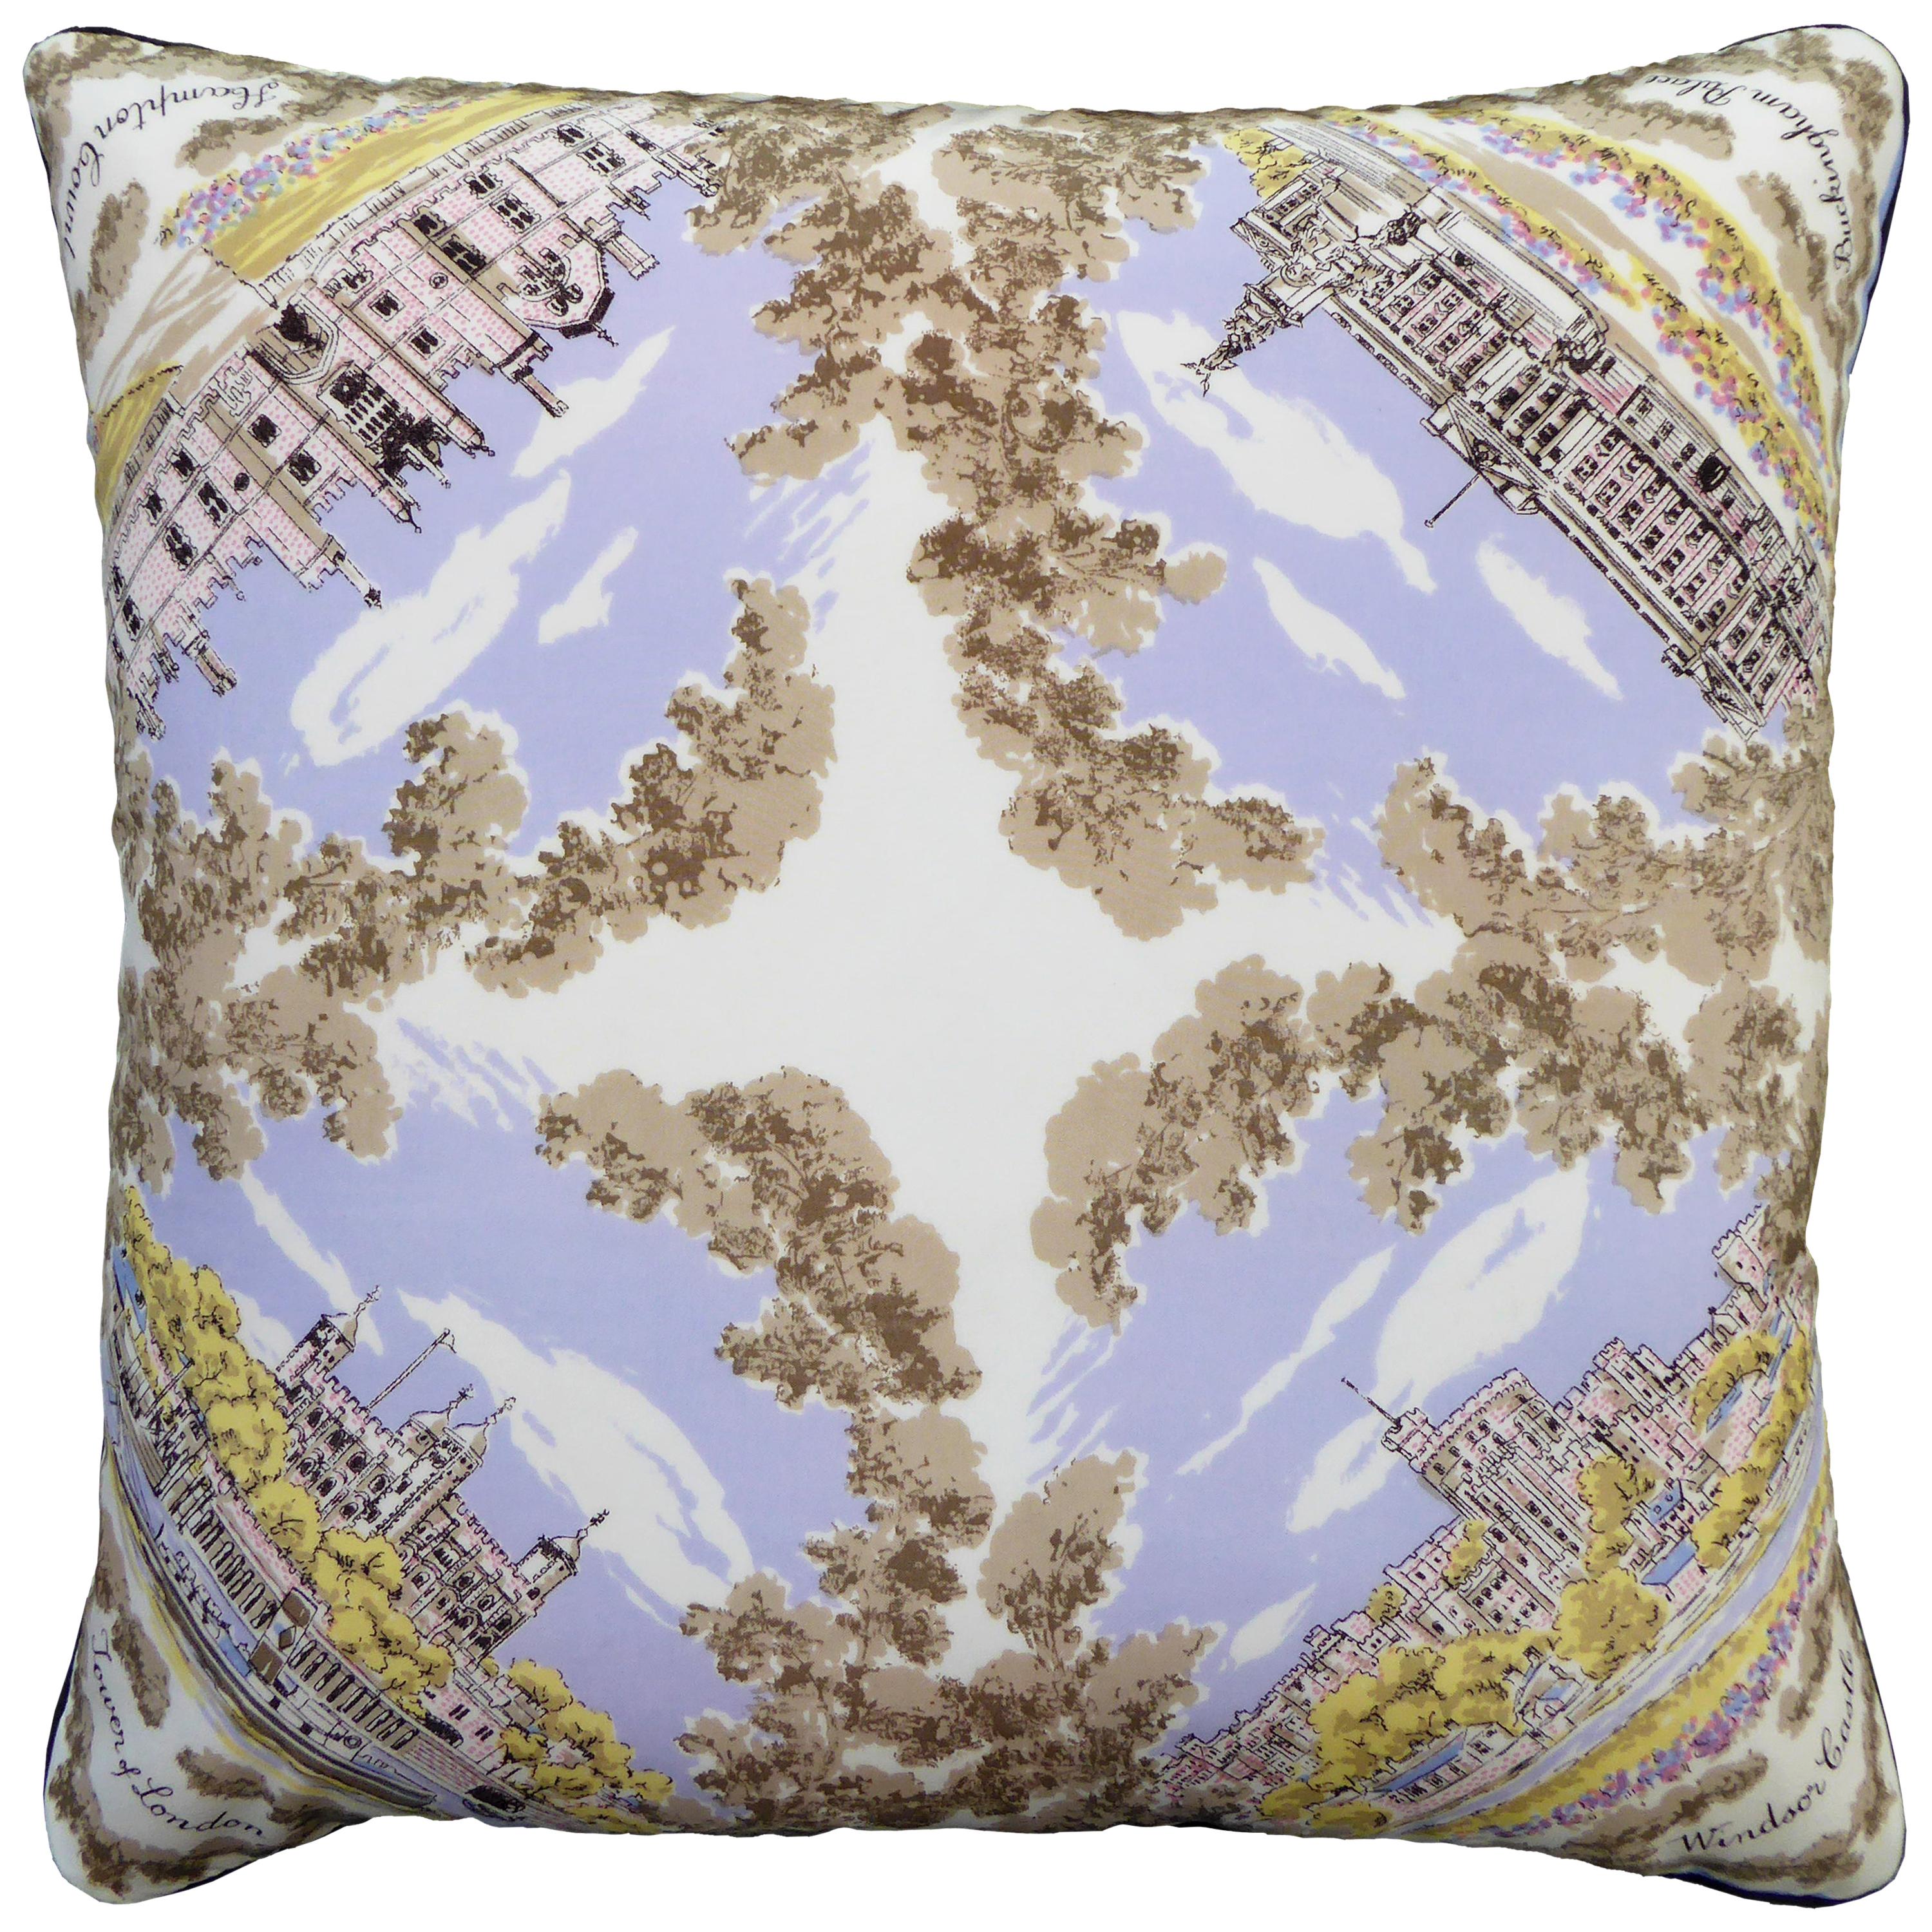 Vintage Cushions, British Bespoke Made Silk Pillow ‘Windsor Castle', Made in UK